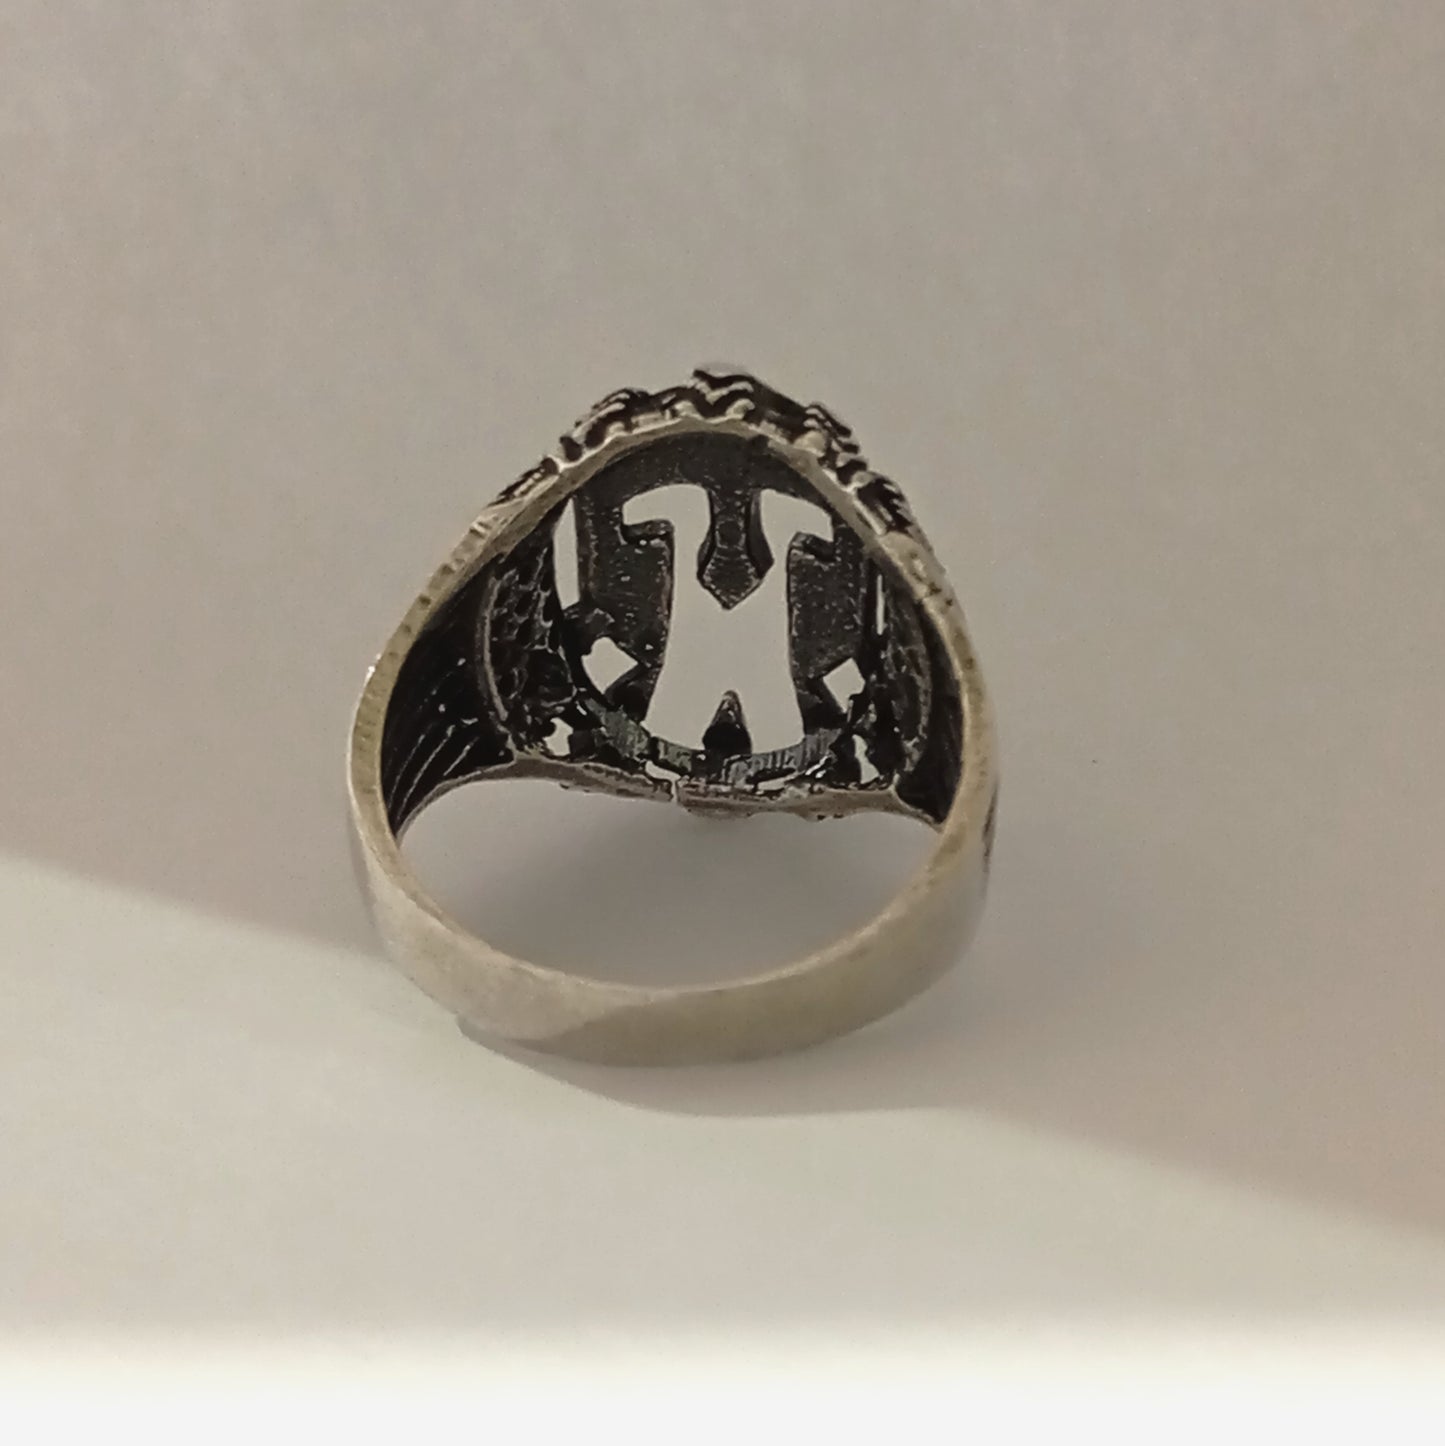 Spartan Helmet - King Leonidas - 300 Spartans - Battle of Thermopylae - 480 BC - Ring - Size EU 61 - Size US 9 1/2 - 925 Sterling Silver